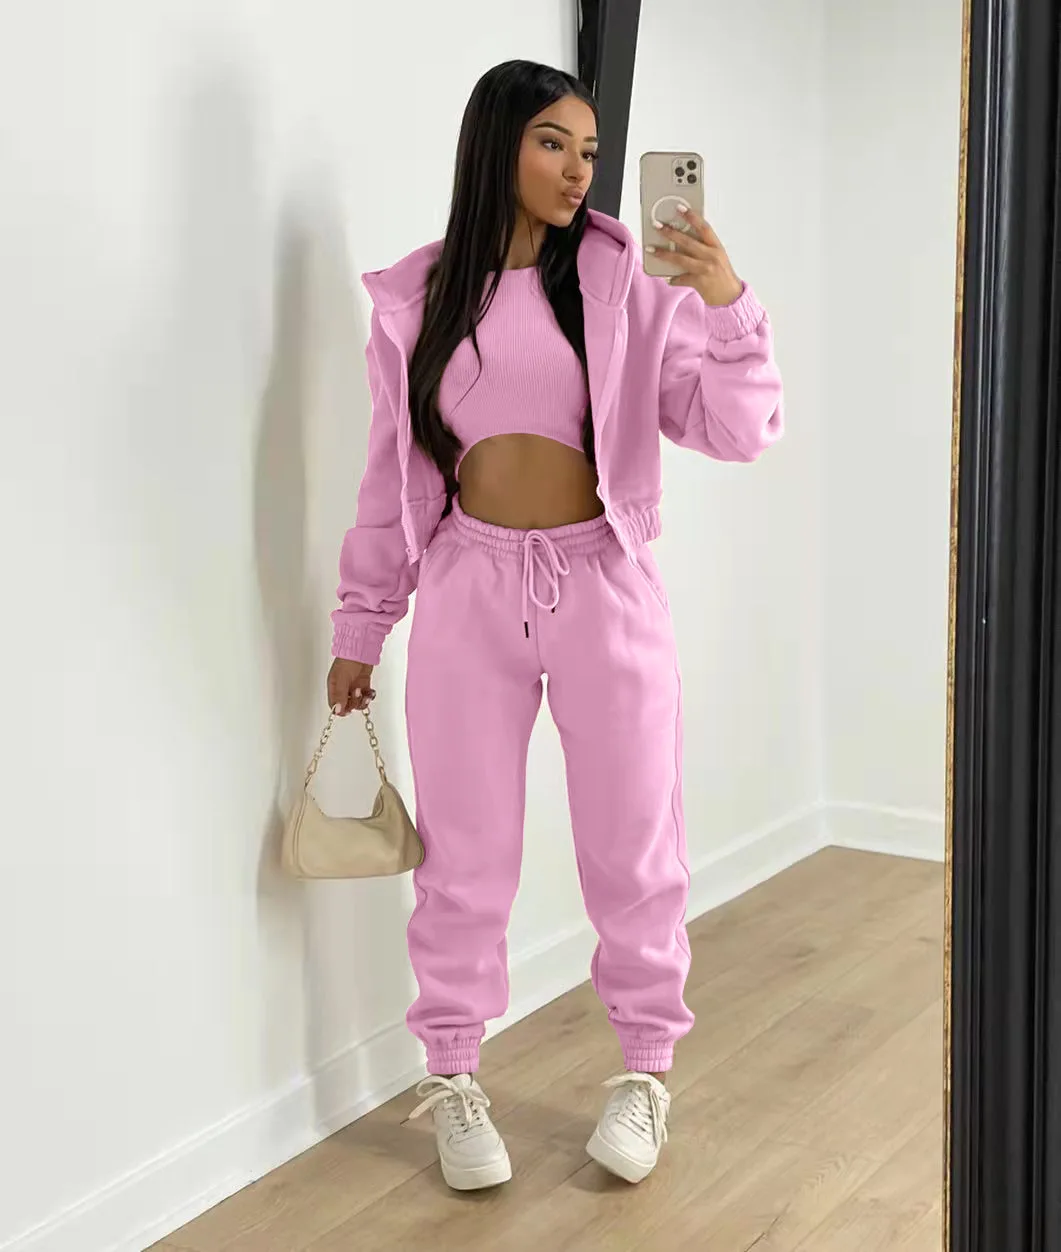 

Casual Long Sleeve Pant Suits Sporty Three Pieces Outfit Women Zip Hoodies+Ribbed Tank+High Waist Sweatpants Jogger 3 Piece Sets